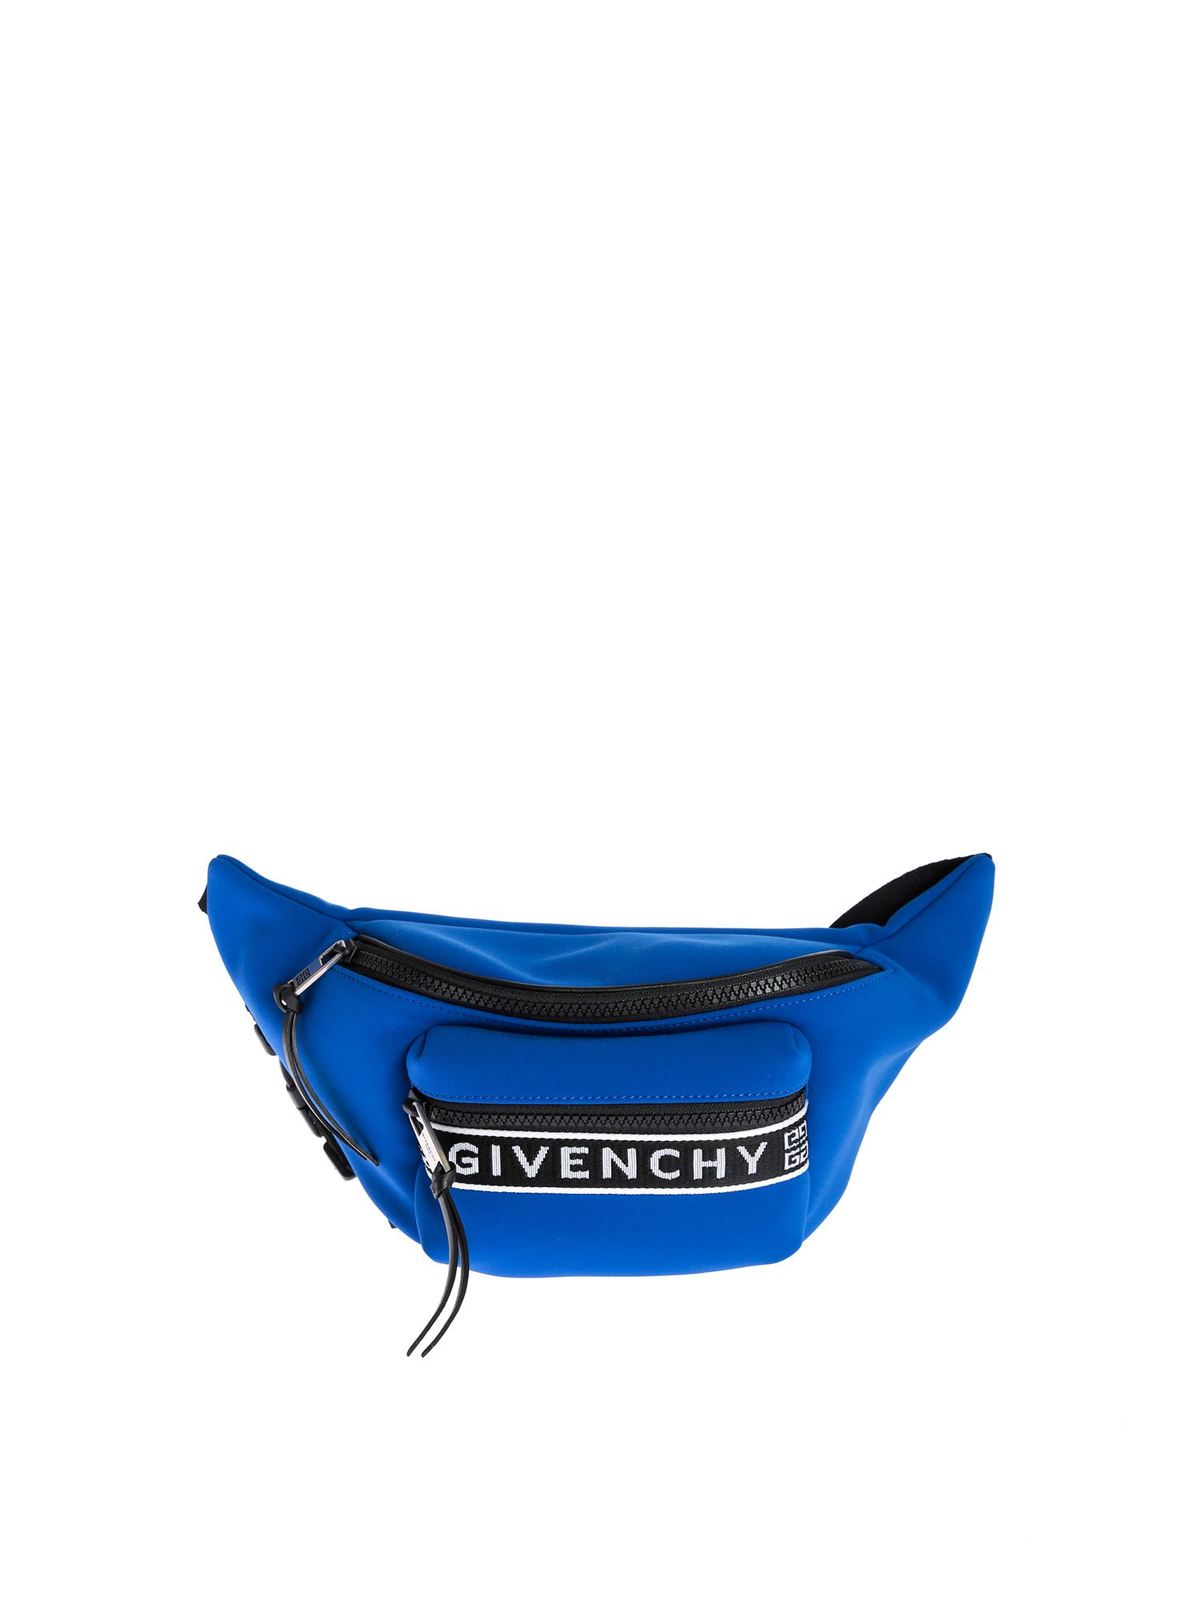 Givenchy 4g Bum Bag In Blue